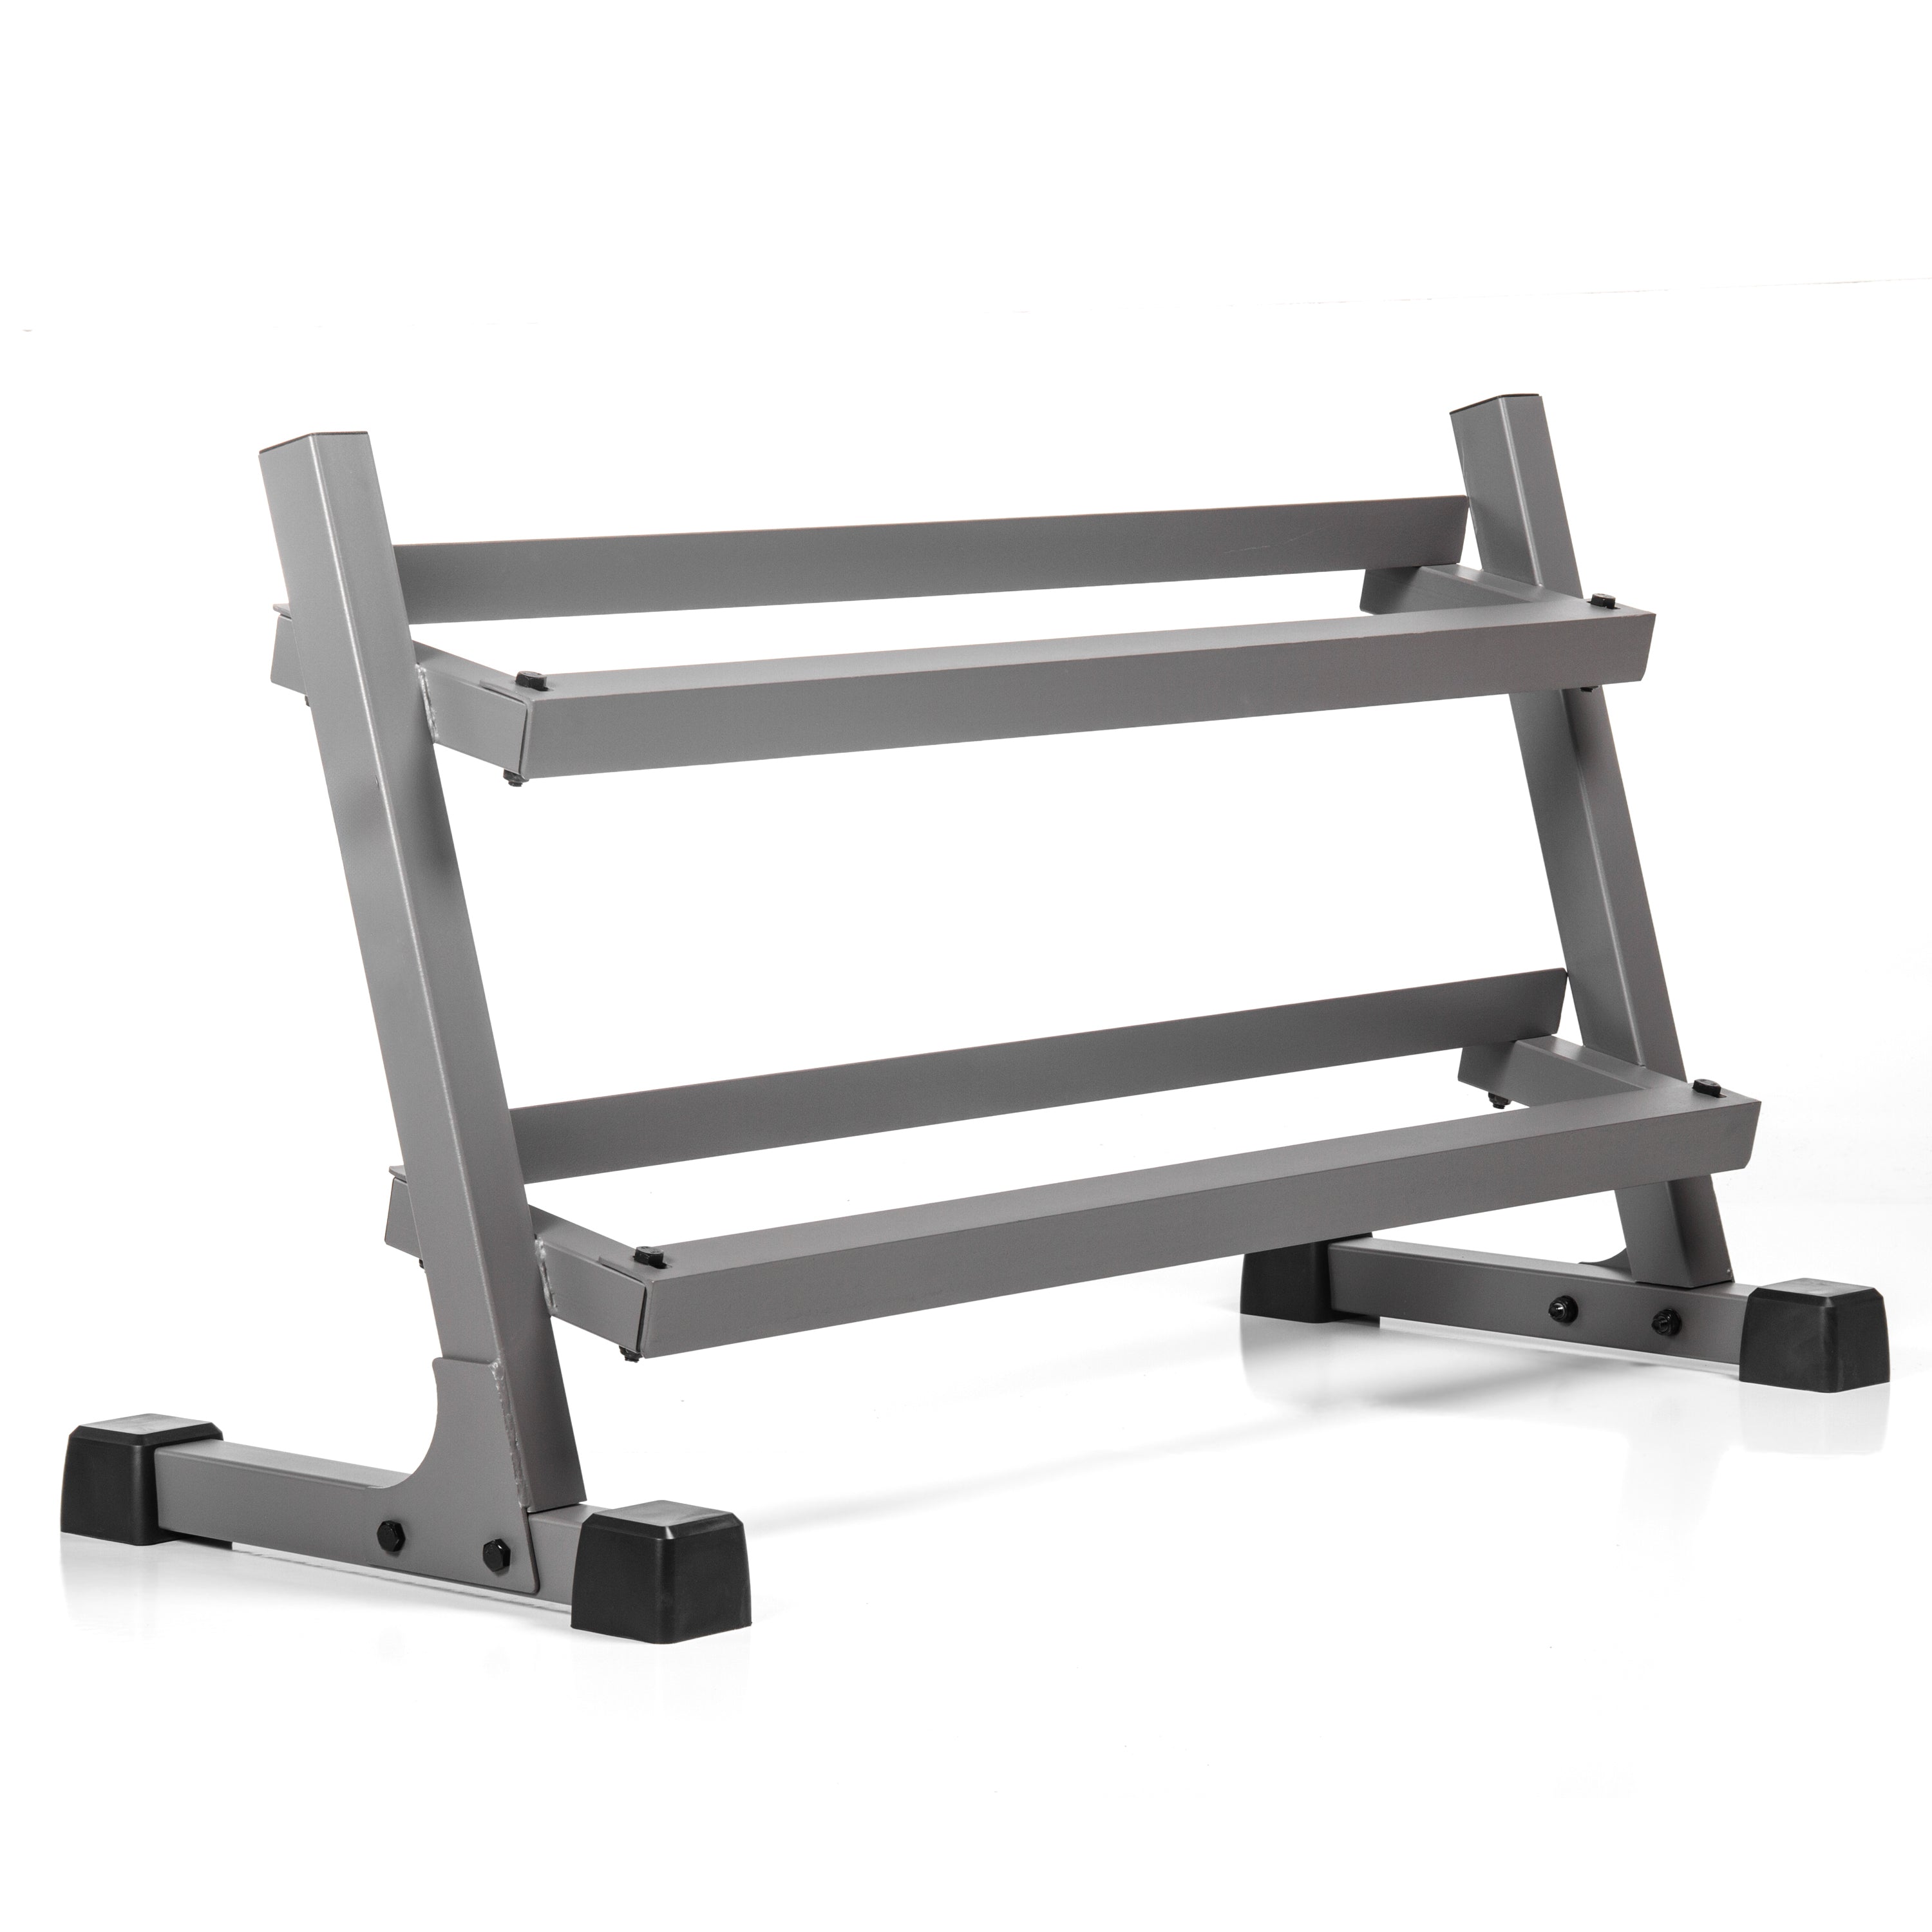 2-Tier Dumbbell Rack, Heavy Duty Storage for Free Weights